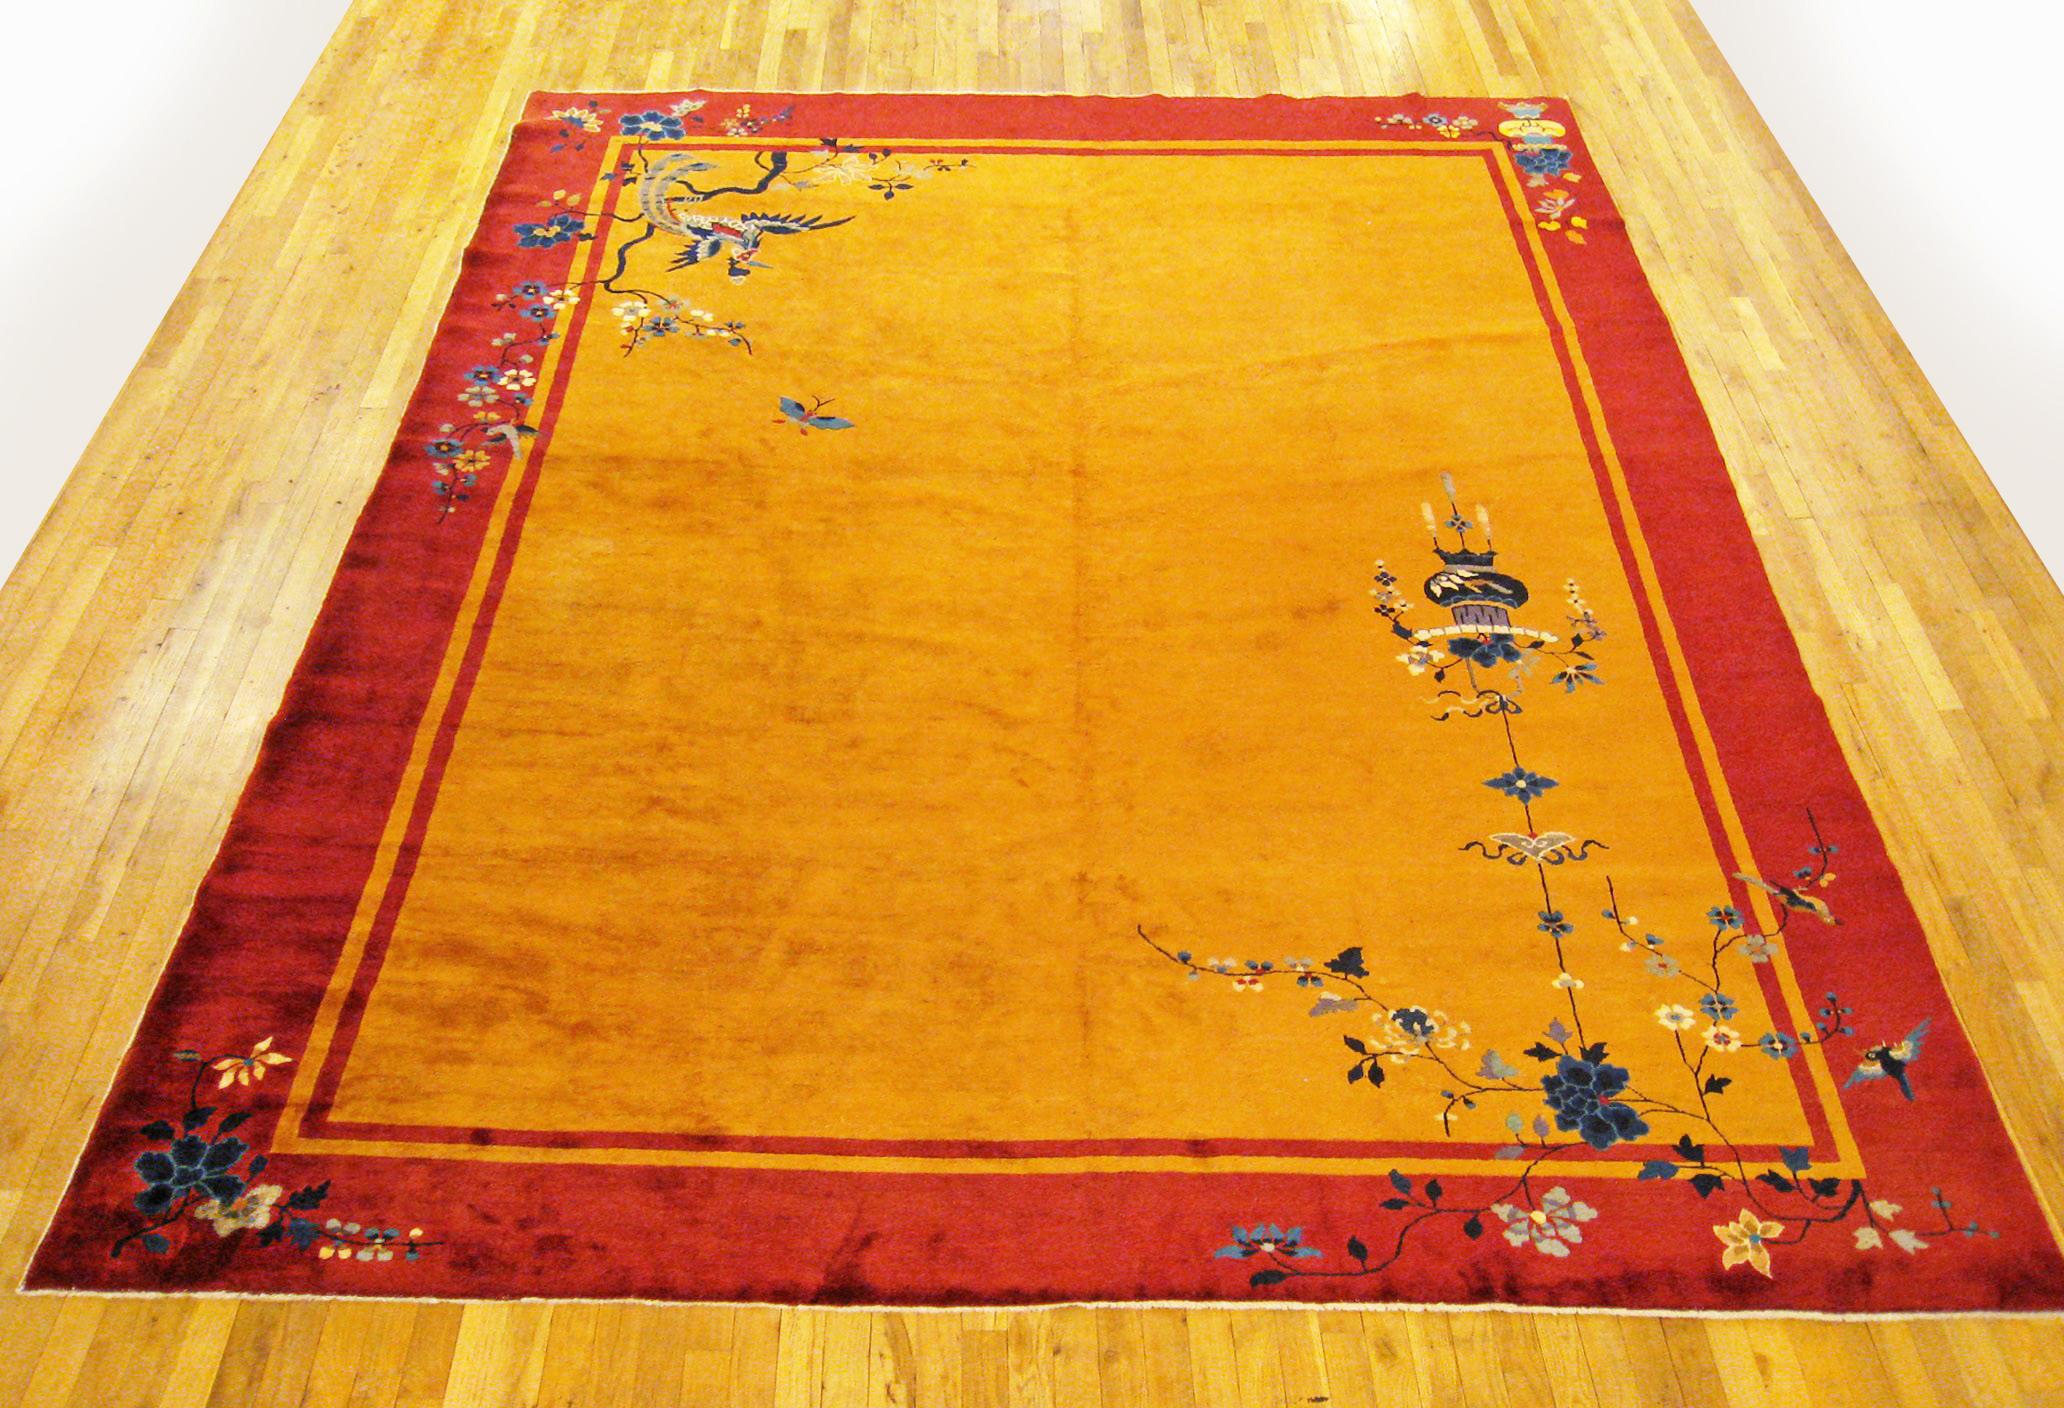 Antique Chinese Art deco Rug, Room size, circa 1920.

A one-of-a-kind antique Chinese Art deco oriental carpet, hand-knotted with medium thickness wool pile. This beautiful hand-knotted rug features art deco and chinese motifs allover a large gold